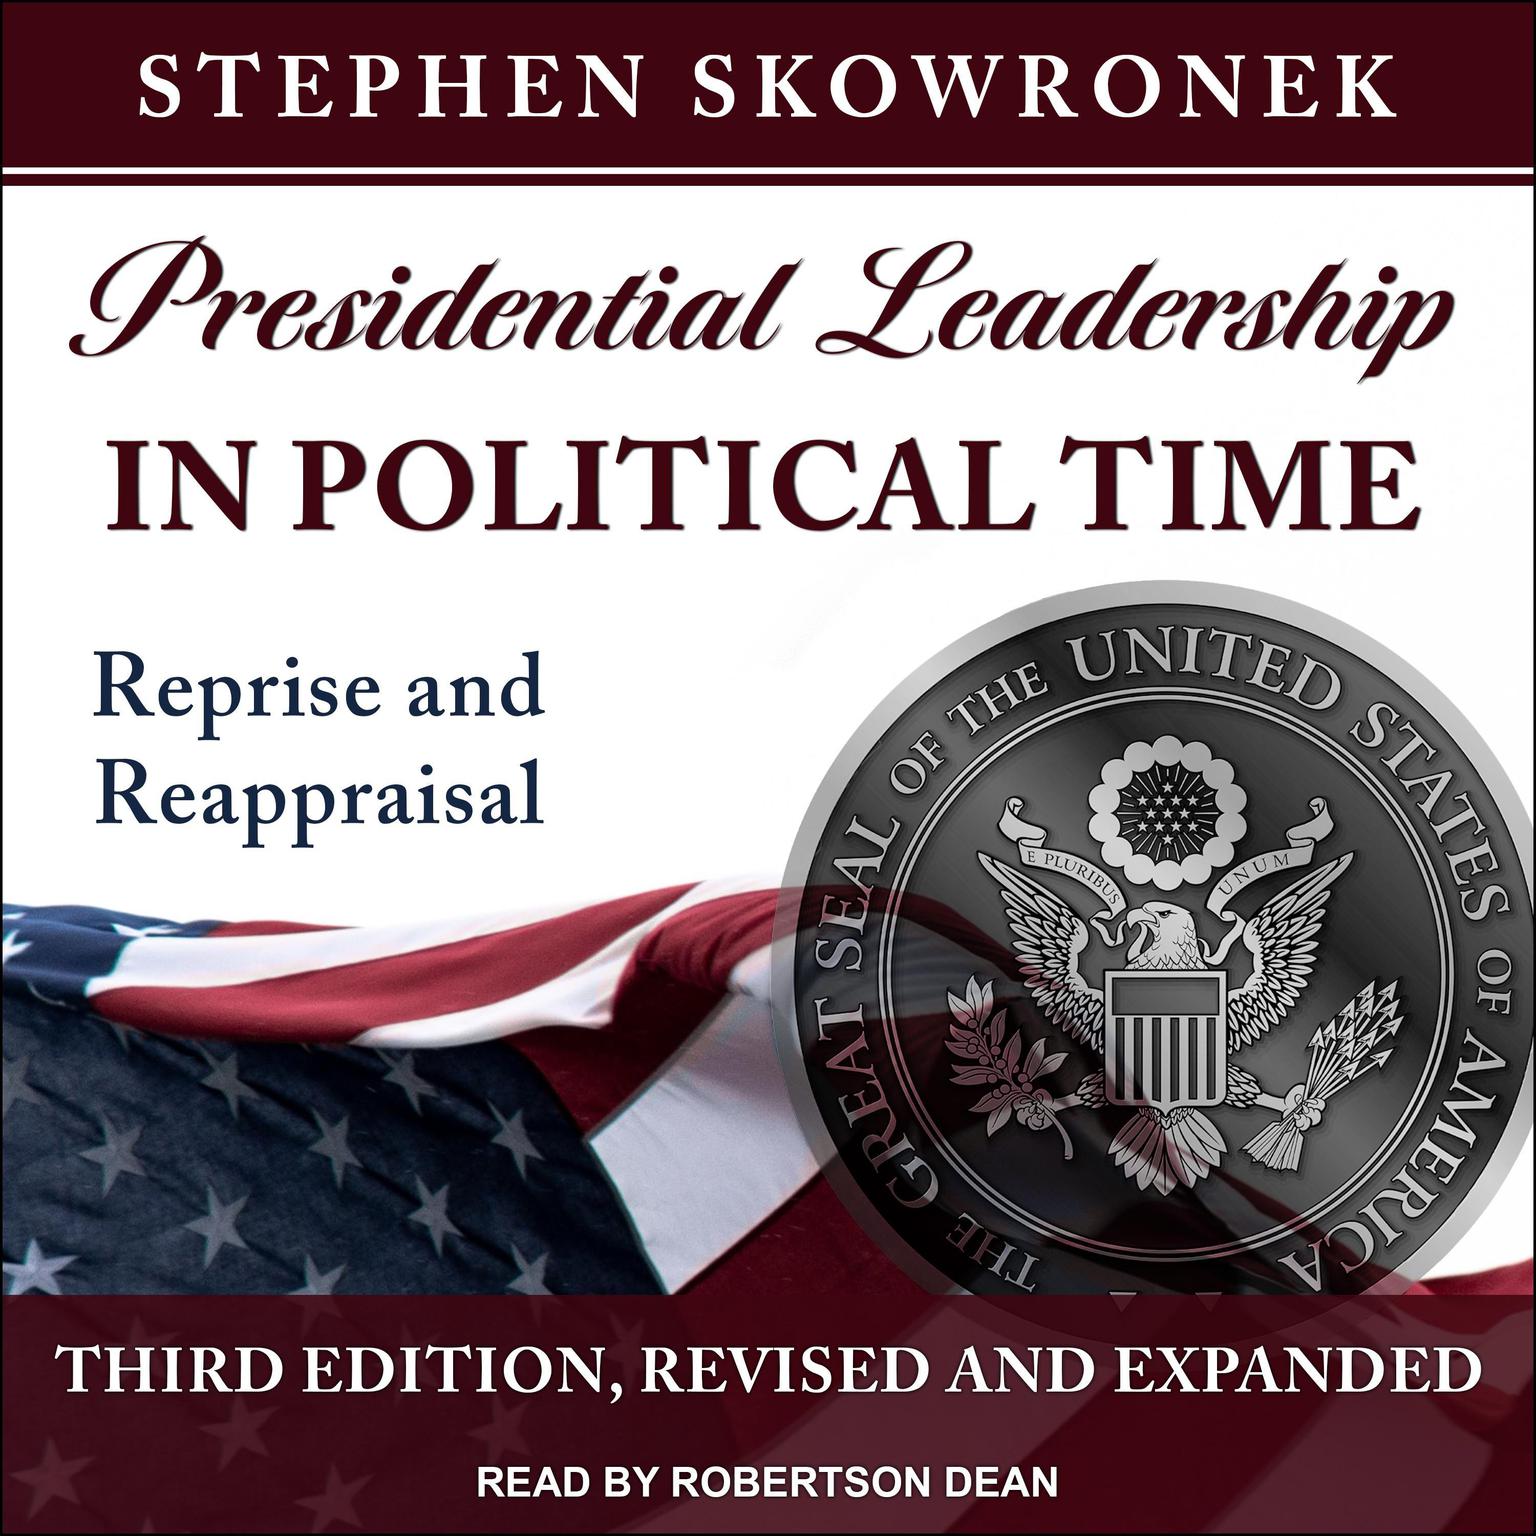 Presidential Leadership in Political Time: Reprise and Reappraisal, Third Edition, Revised and Expanded Audiobook, by Stephen Skowronek